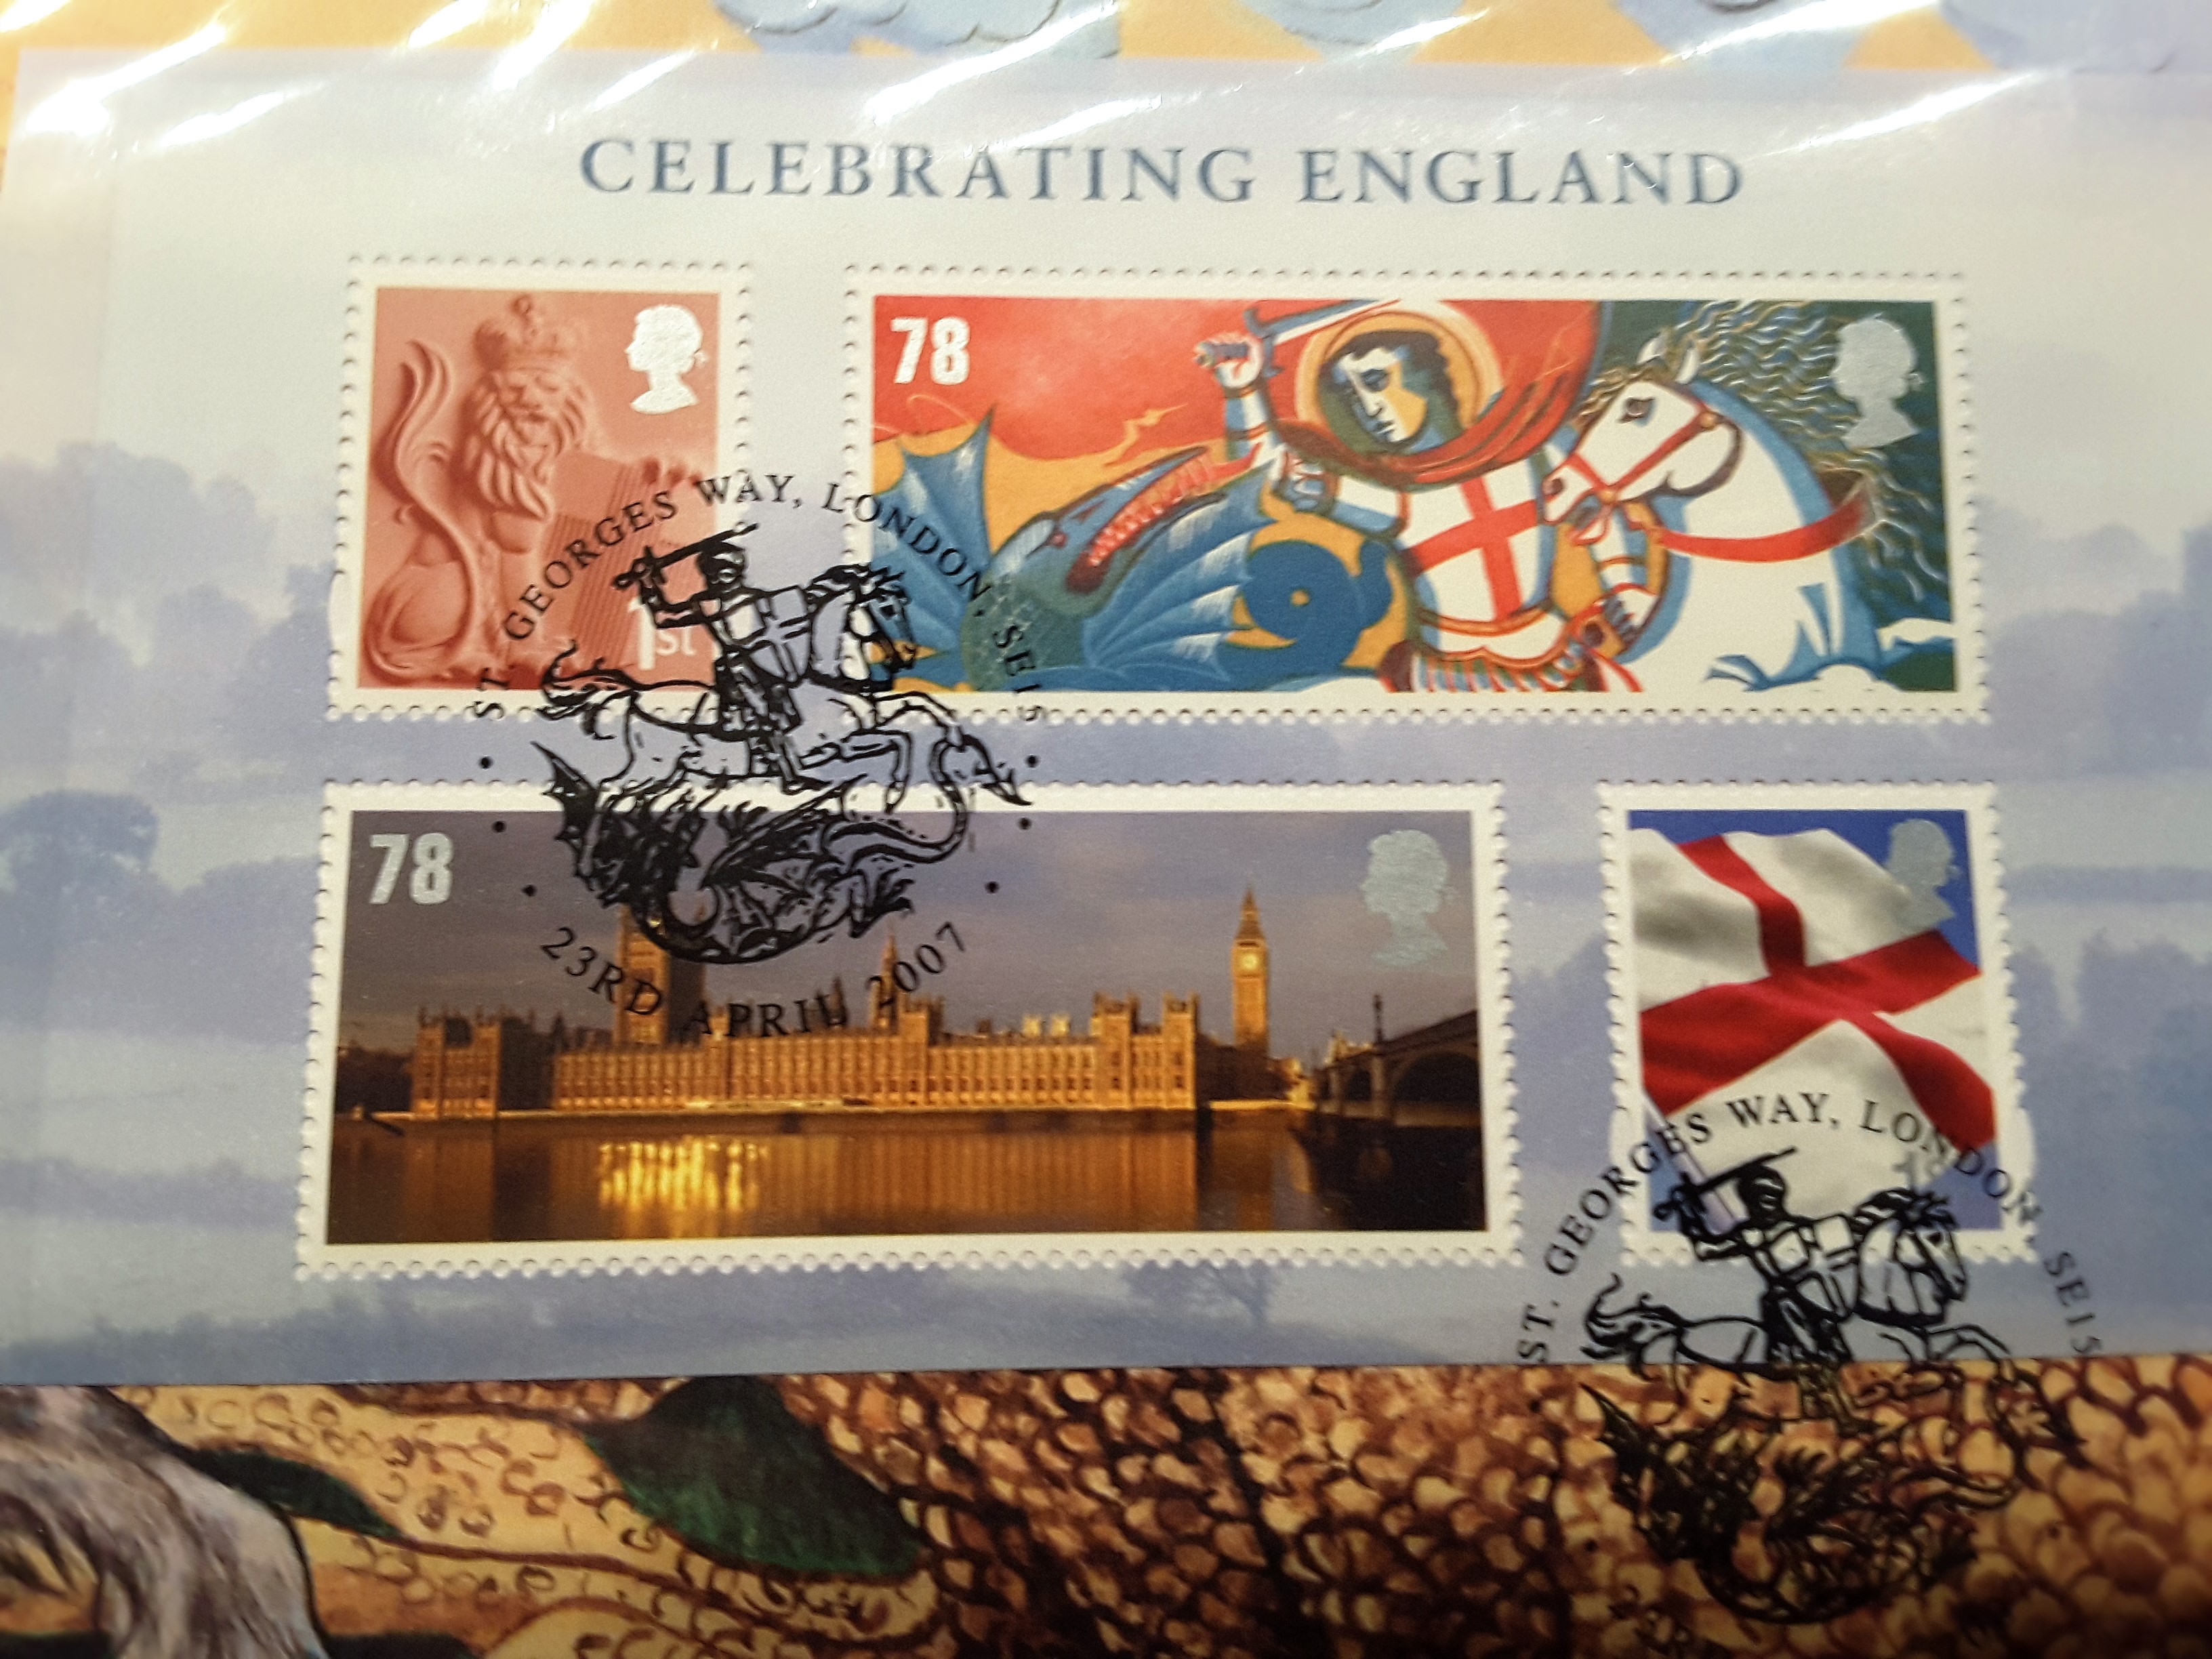 GB COIN FIRST DAY COVER - CELEBRATING ENGLAND - Image 3 of 4